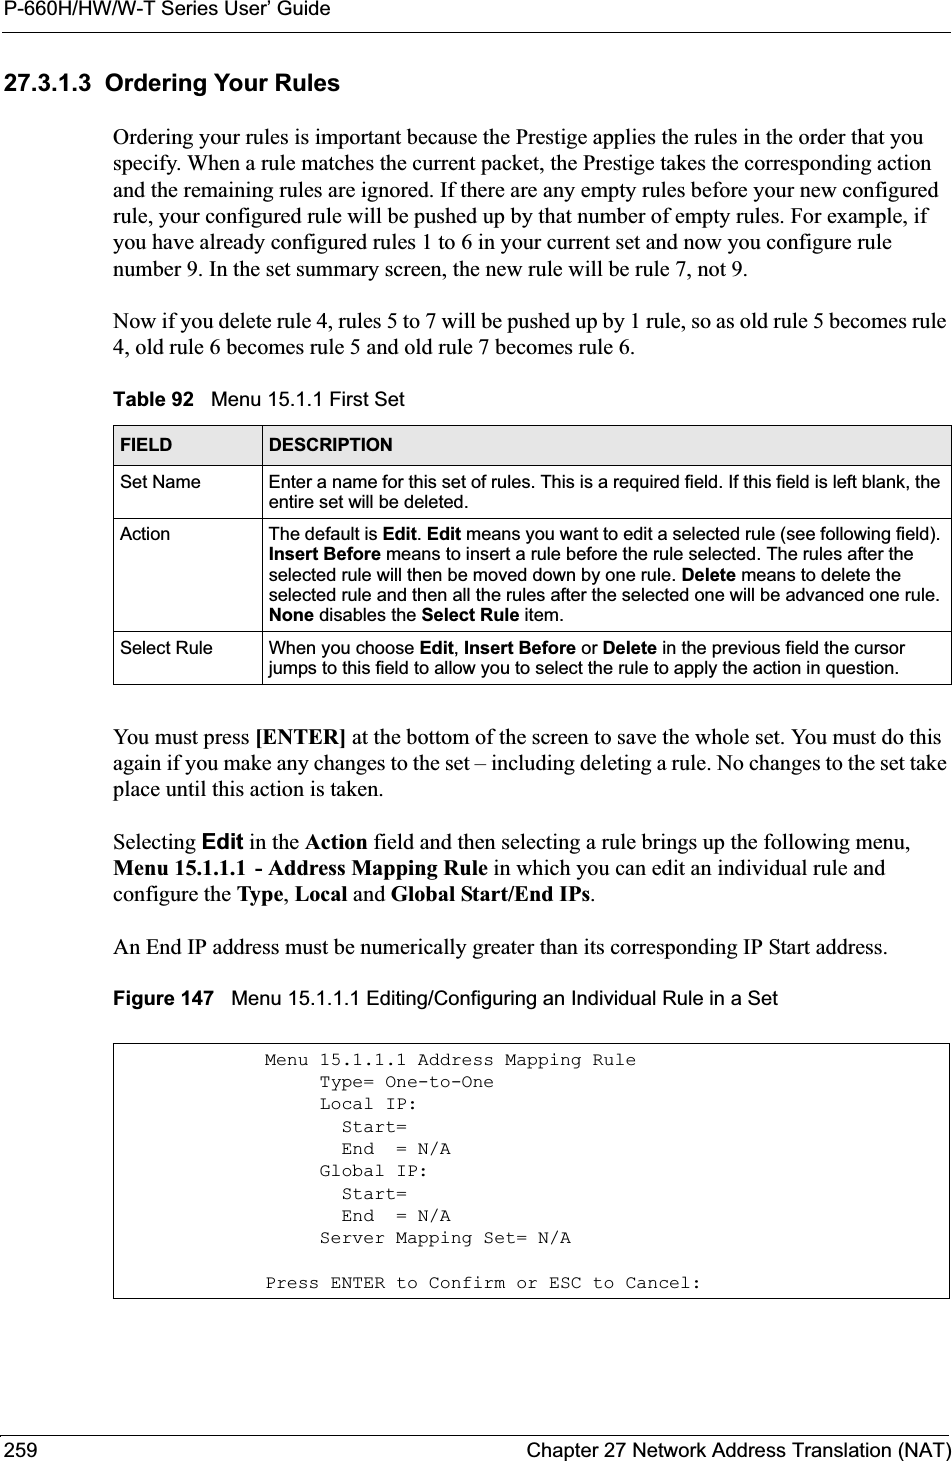 P-660H/HW/W-T Series User’ Guide259 Chapter 27 Network Address Translation (NAT)27.3.1.3  Ordering Your RulesOrdering your rules is important because the Prestige applies the rules in the order that you specify. When a rule matches the current packet, the Prestige takes the corresponding action and the remaining rules are ignored. If there are any empty rules before your new configured rule, your configured rule will be pushed up by that number of empty rules. For example, if you have already configured rules 1 to 6 in your current set and now you configure rule number 9. In the set summary screen, the new rule will be rule 7, not 9. Now if you delete rule 4, rules 5 to 7 will be pushed up by 1 rule, so as old rule 5 becomes rule 4, old rule 6 becomes rule 5 and old rule 7 becomes rule 6. You must press [ENTER] at the bottom of the screen to save the whole set. You must do this again if you make any changes to the set – including deleting a rule. No changes to the set take place until this action is taken. Selecting Edit in the Action field and then selecting a rule brings up the following menu, Menu 15.1.1.1 - Address Mapping Rule in which you can edit an individual rule and configure the Type,Local and Global Start/End IPs.An End IP address must be numerically greater than its corresponding IP Start address.Figure 147   Menu 15.1.1.1 Editing/Configuring an Individual Rule in a Set Table 92   Menu 15.1.1 First SetFIELD DESCRIPTIONSet Name Enter a name for this set of rules. This is a required field. If this field is left blank, the entire set will be deleted.Action The default is Edit.Edit means you want to edit a selected rule (see following field). Insert Before means to insert a rule before the rule selected. The rules after the selected rule will then be moved down by one rule. Delete means to delete the selected rule and then all the rules after the selected one will be advanced one rule. None disables the Select Rule item.Select Rule When you choose Edit,Insert Before or Delete in the previous field the cursor jumps to this field to allow you to select the rule to apply the action in question.Menu 15.1.1.1 Address Mapping Rule     Type= One-to-One     Local IP:       Start=       End  = N/A     Global IP:       Start=       End  = N/A     Server Mapping Set= N/APress ENTER to Confirm or ESC to Cancel: